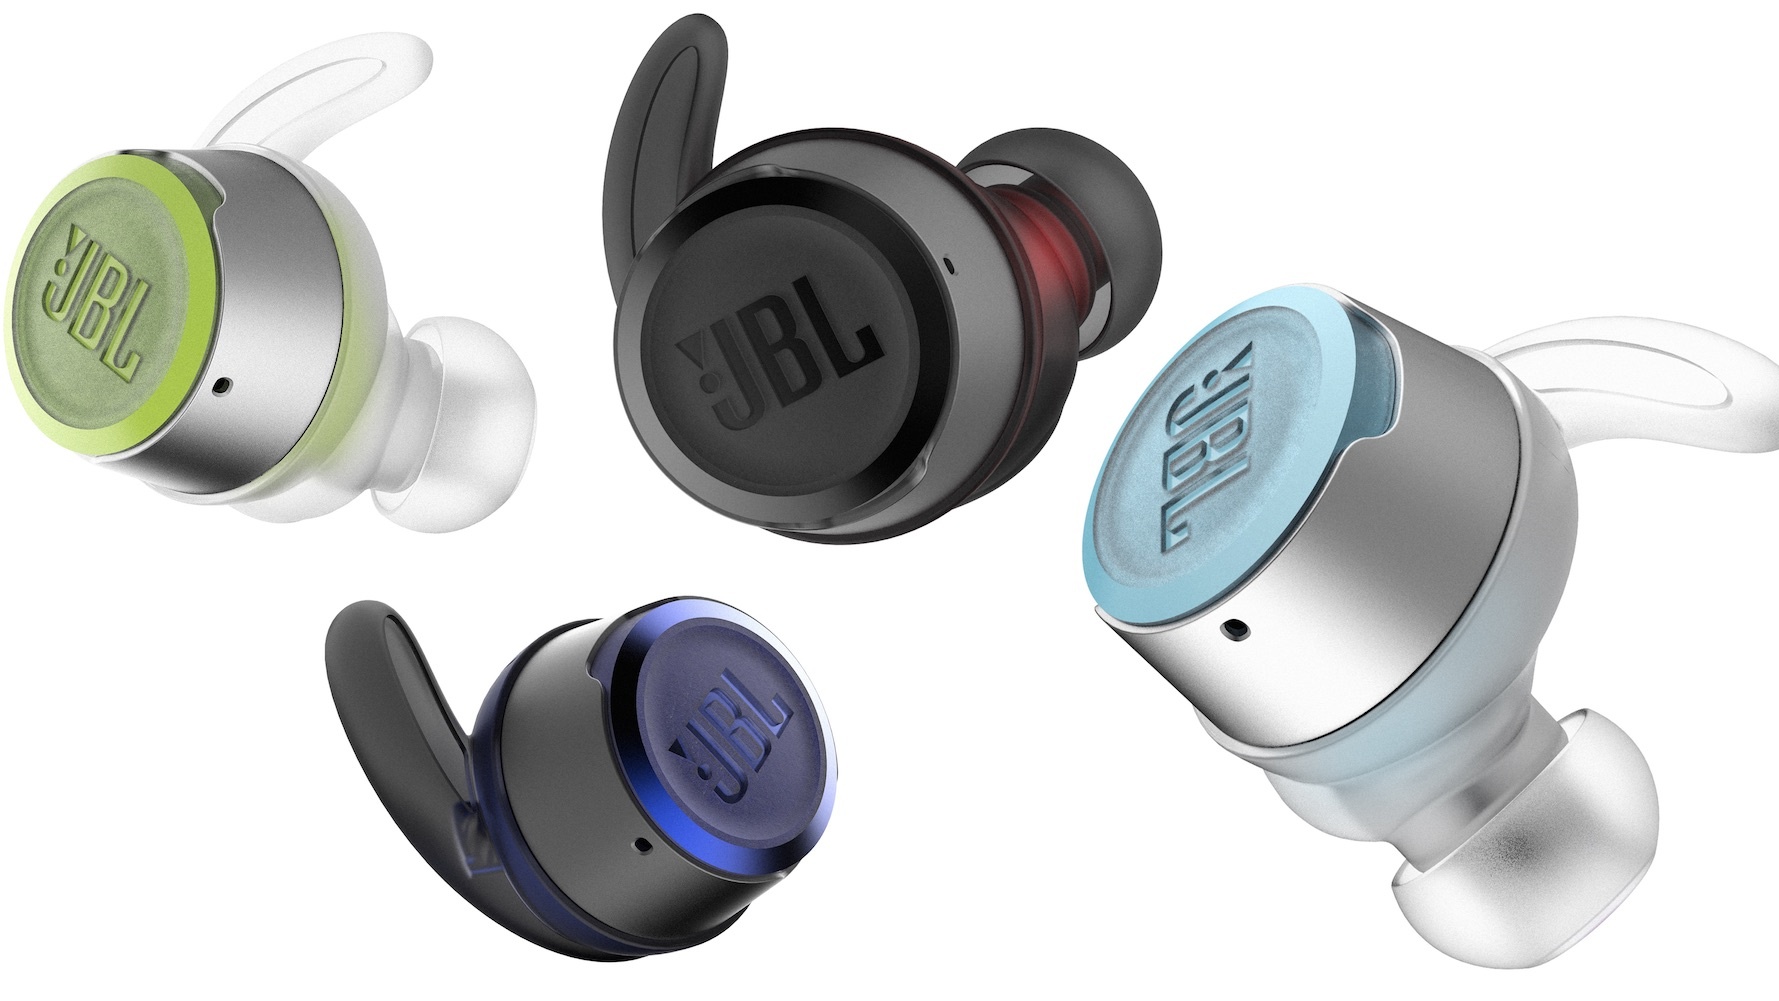 jbl compared to beats